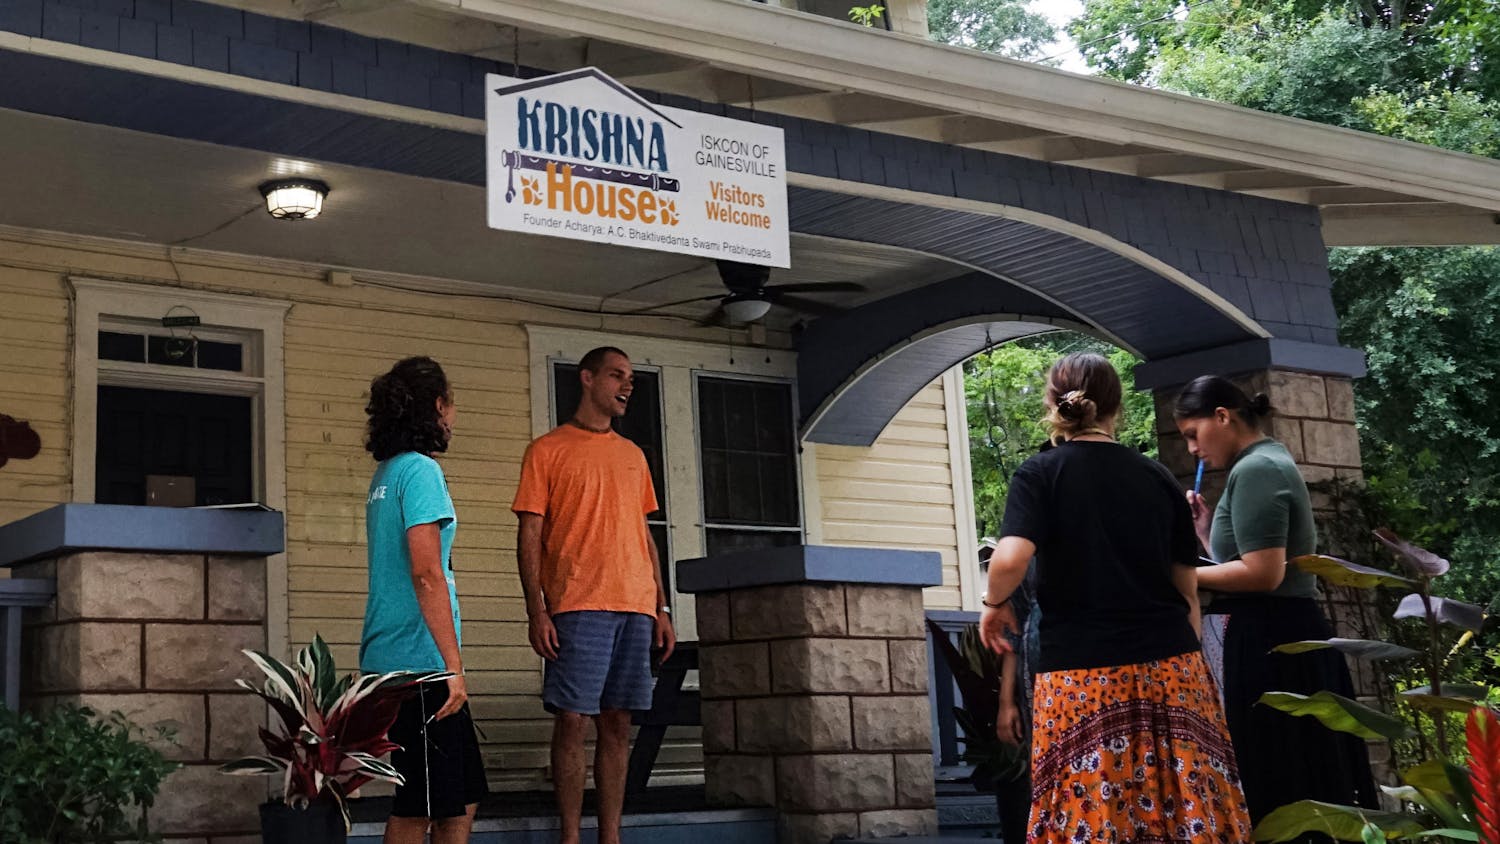 A group of Hare Krishnas gathered outside the Krishna House at 214 NW 14th Street in Gainesville on Thursday, July 29, 2021. The Gainesville community is celebrating the 50th anniversary of Krishna Lunch at UF this weekend. 